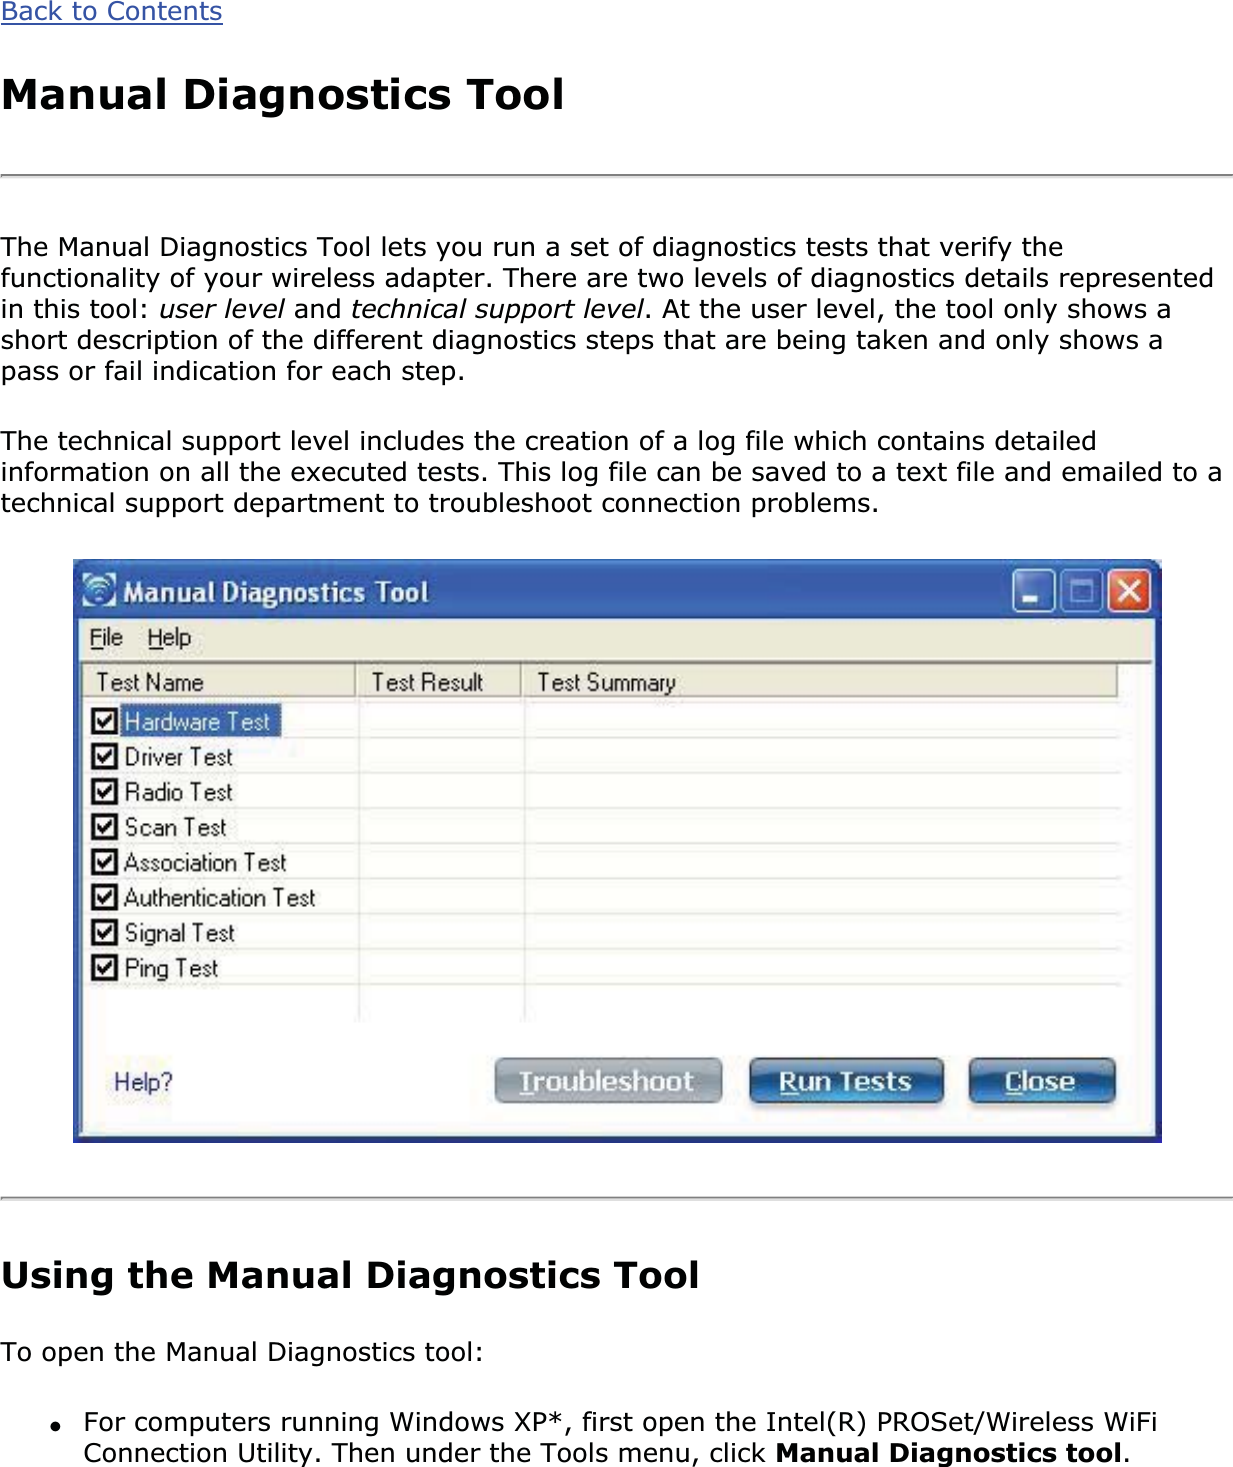 Back to ContentsManual Diagnostics ToolThe Manual Diagnostics Tool lets you run a set of diagnostics tests that verify the functionality of your wireless adapter. There are two levels of diagnostics details represented in this tool: user level and technical support level. At the user level, the tool only shows a short description of the different diagnostics steps that are being taken and only shows a pass or fail indication for each step. The technical support level includes the creation of a log file which contains detailed information on all the executed tests. This log file can be saved to a text file and emailed to a technical support department to troubleshoot connection problems.Using the Manual Diagnostics ToolTo open the Manual Diagnostics tool: ●For computers running Windows XP*, first open the Intel(R) PROSet/Wireless WiFi Connection Utility. Then under the Tools menu, click Manual Diagnostics tool.